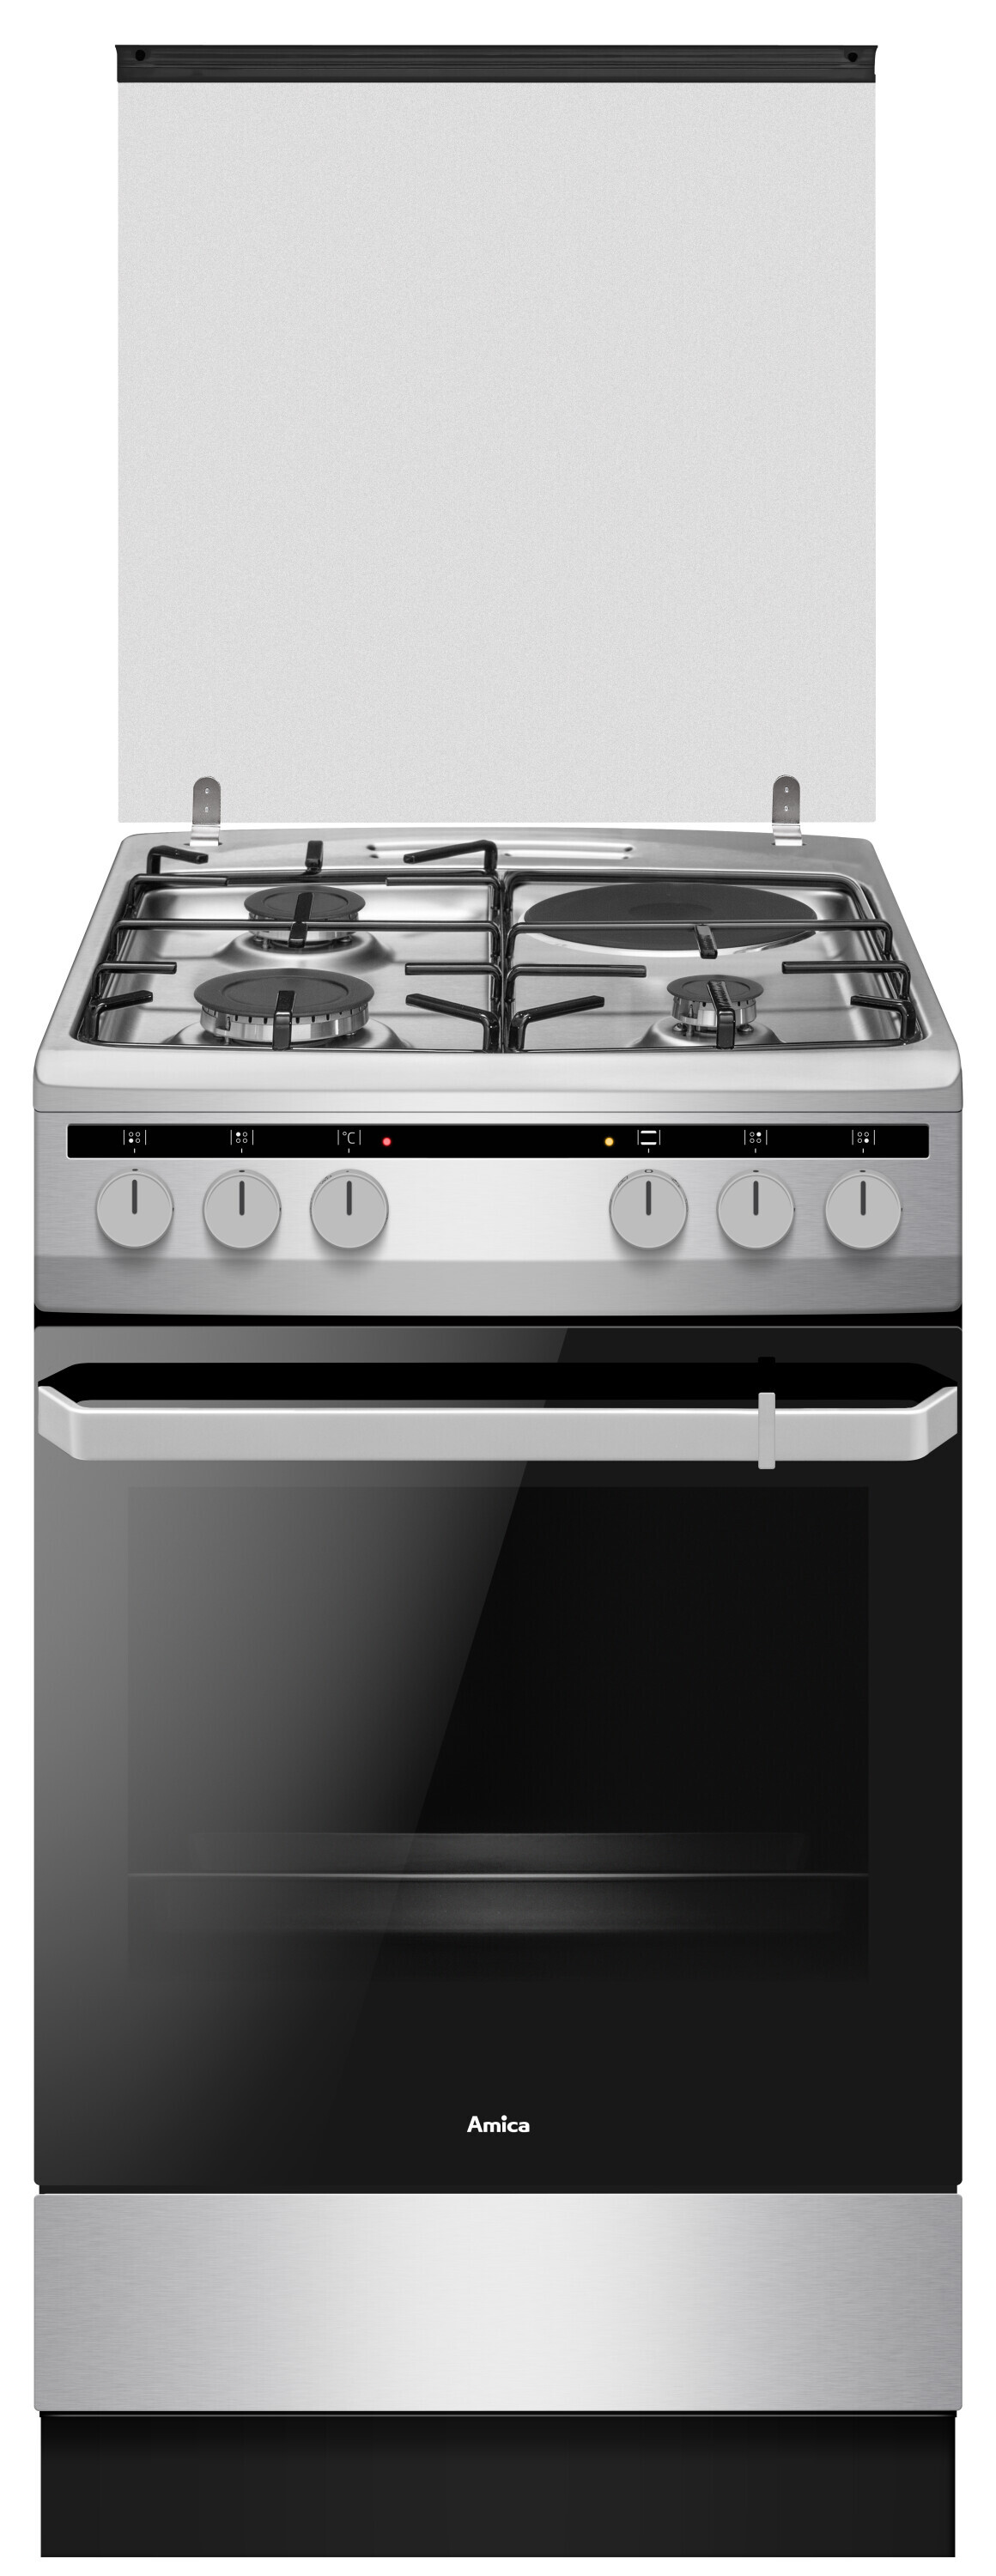 Freestanding cooker with mix hob